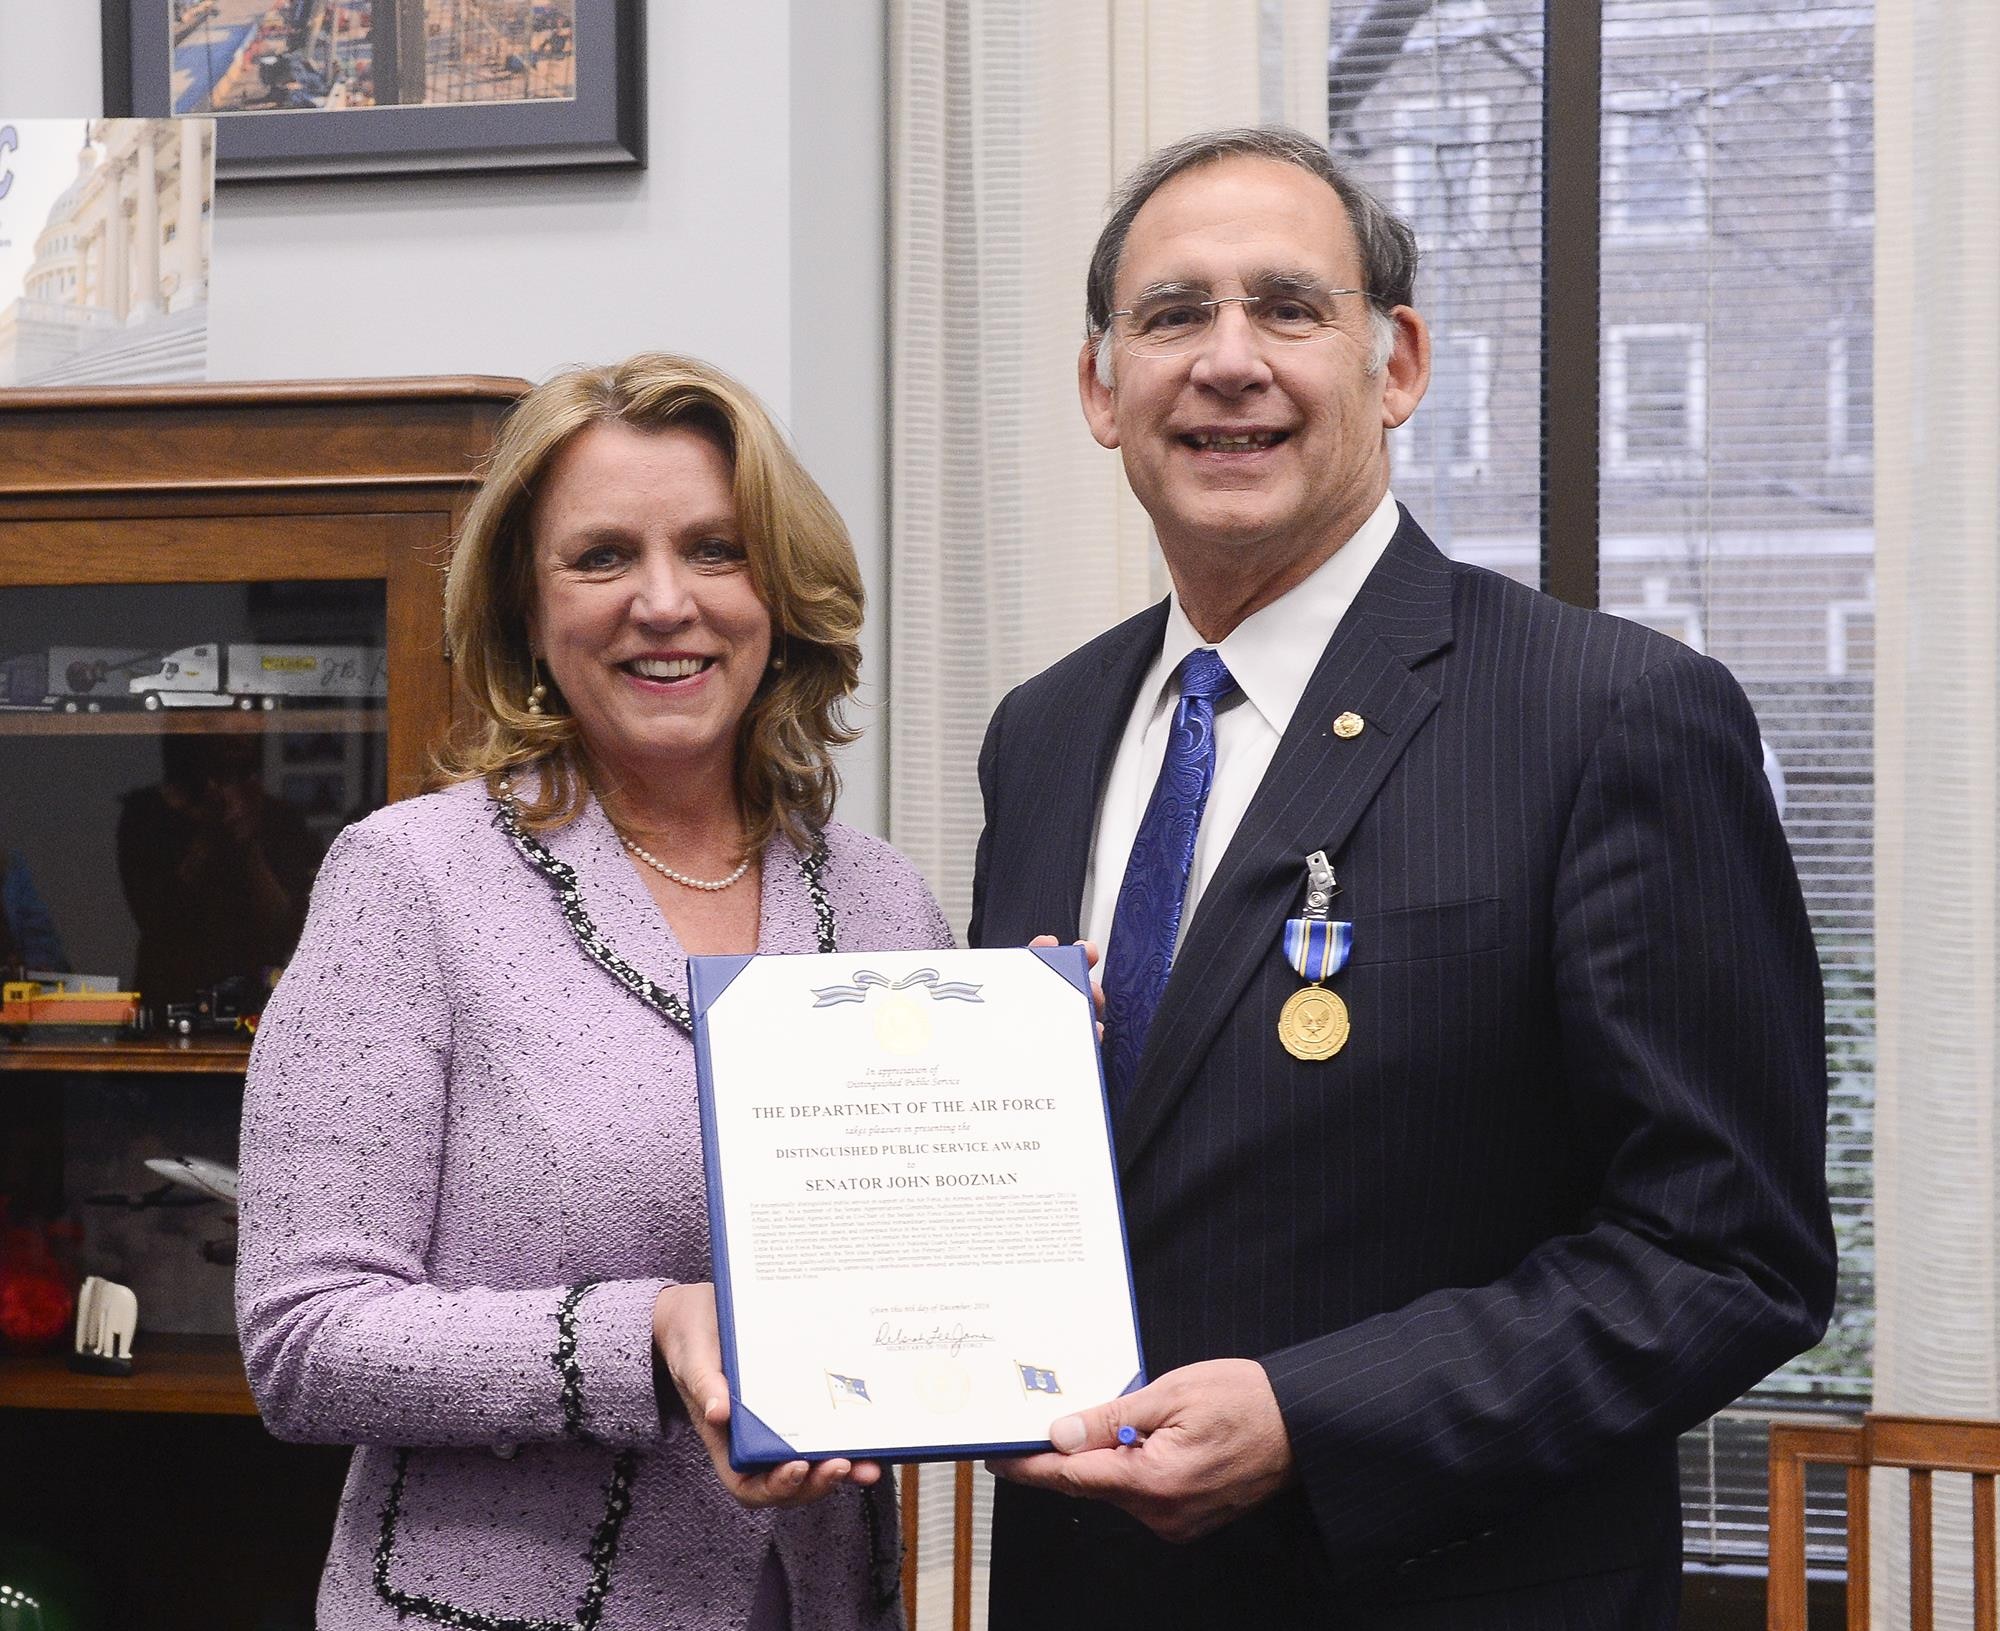 Air Force Secretary Deborah Lee James presents the Distinguished Public Service Award to U.S. Sen. John Boozman (R-AR), in Washington, D.C. Dec 6, 2016. Boozman supported the addition of a cyber training mission school at Little Rock Air Force Base, Arkansas. The first class graduation scheduled for February 2017. (U.S. Air Force photo/Andy Morataya)